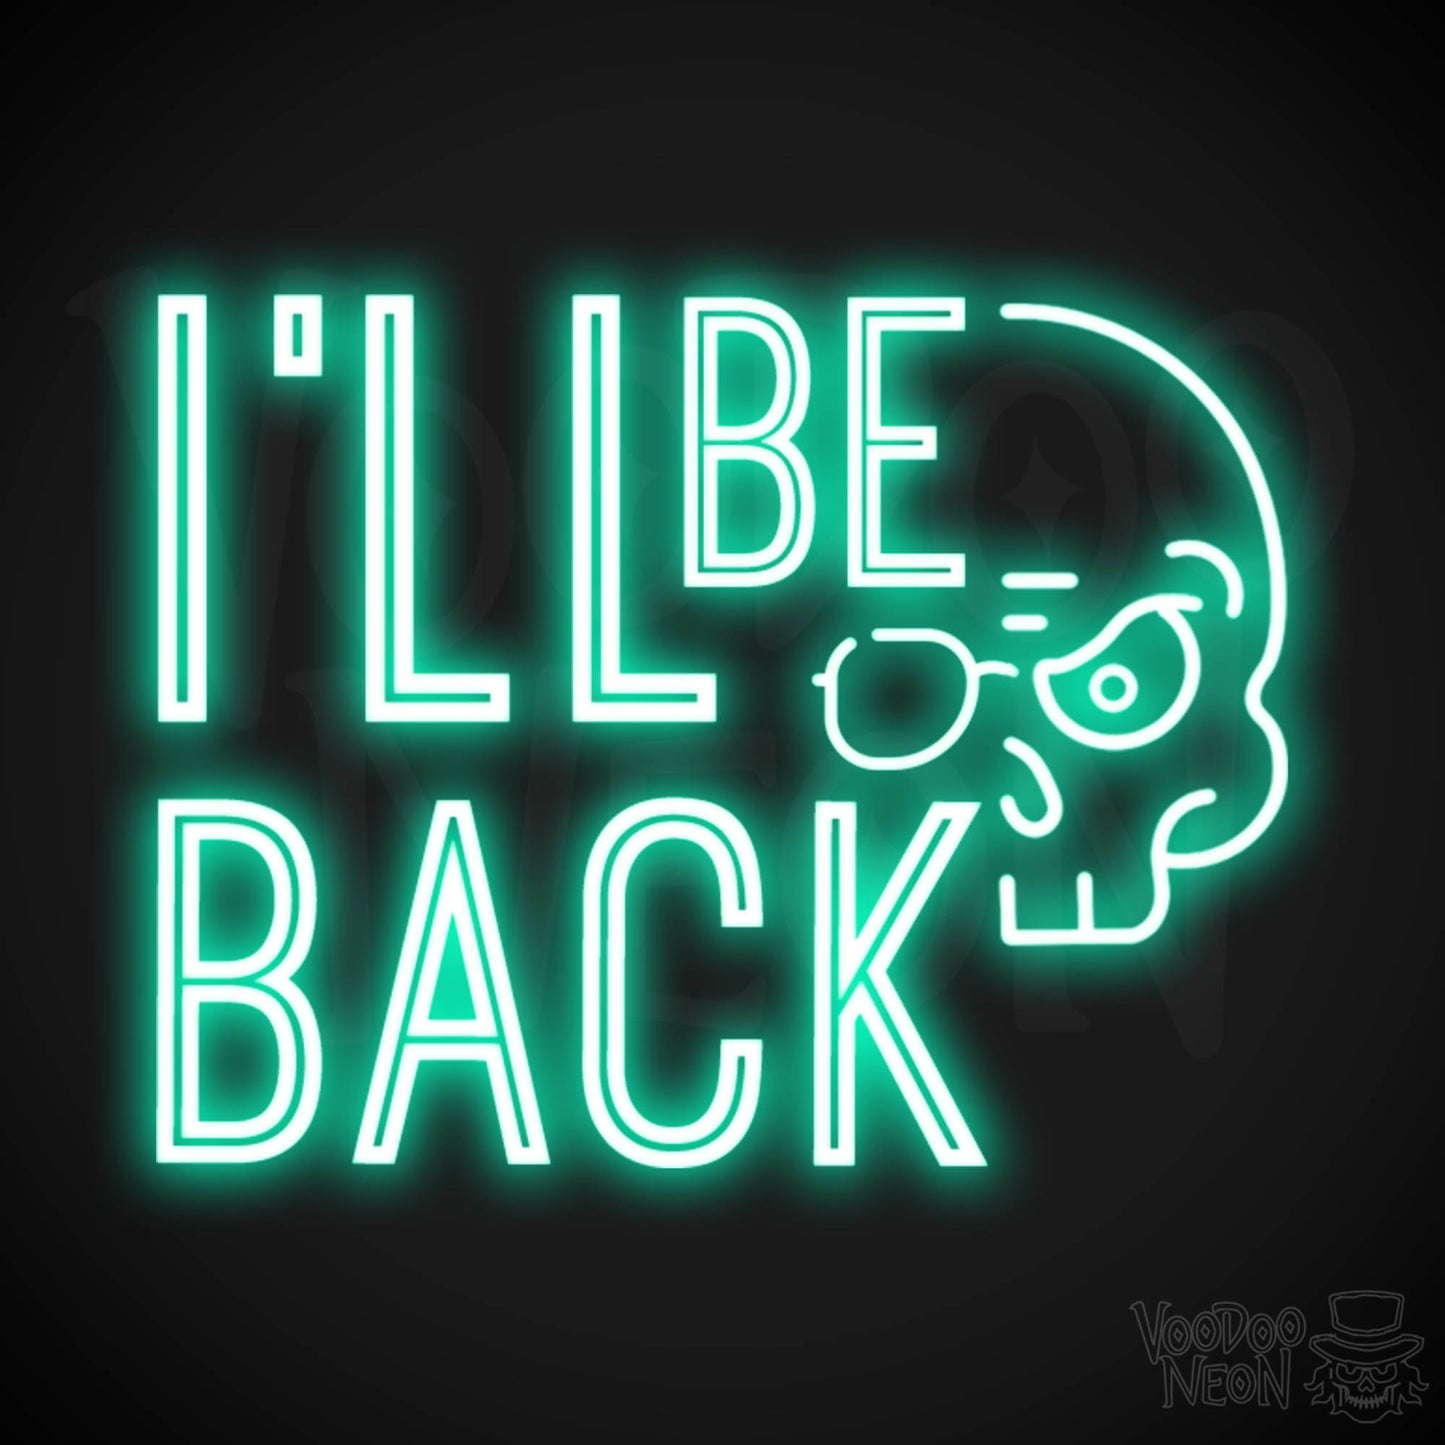 I'll Be Back Neon Sign - Neon I'll Be Back Sign - Light Up Sign Wall Art - Color Light Green